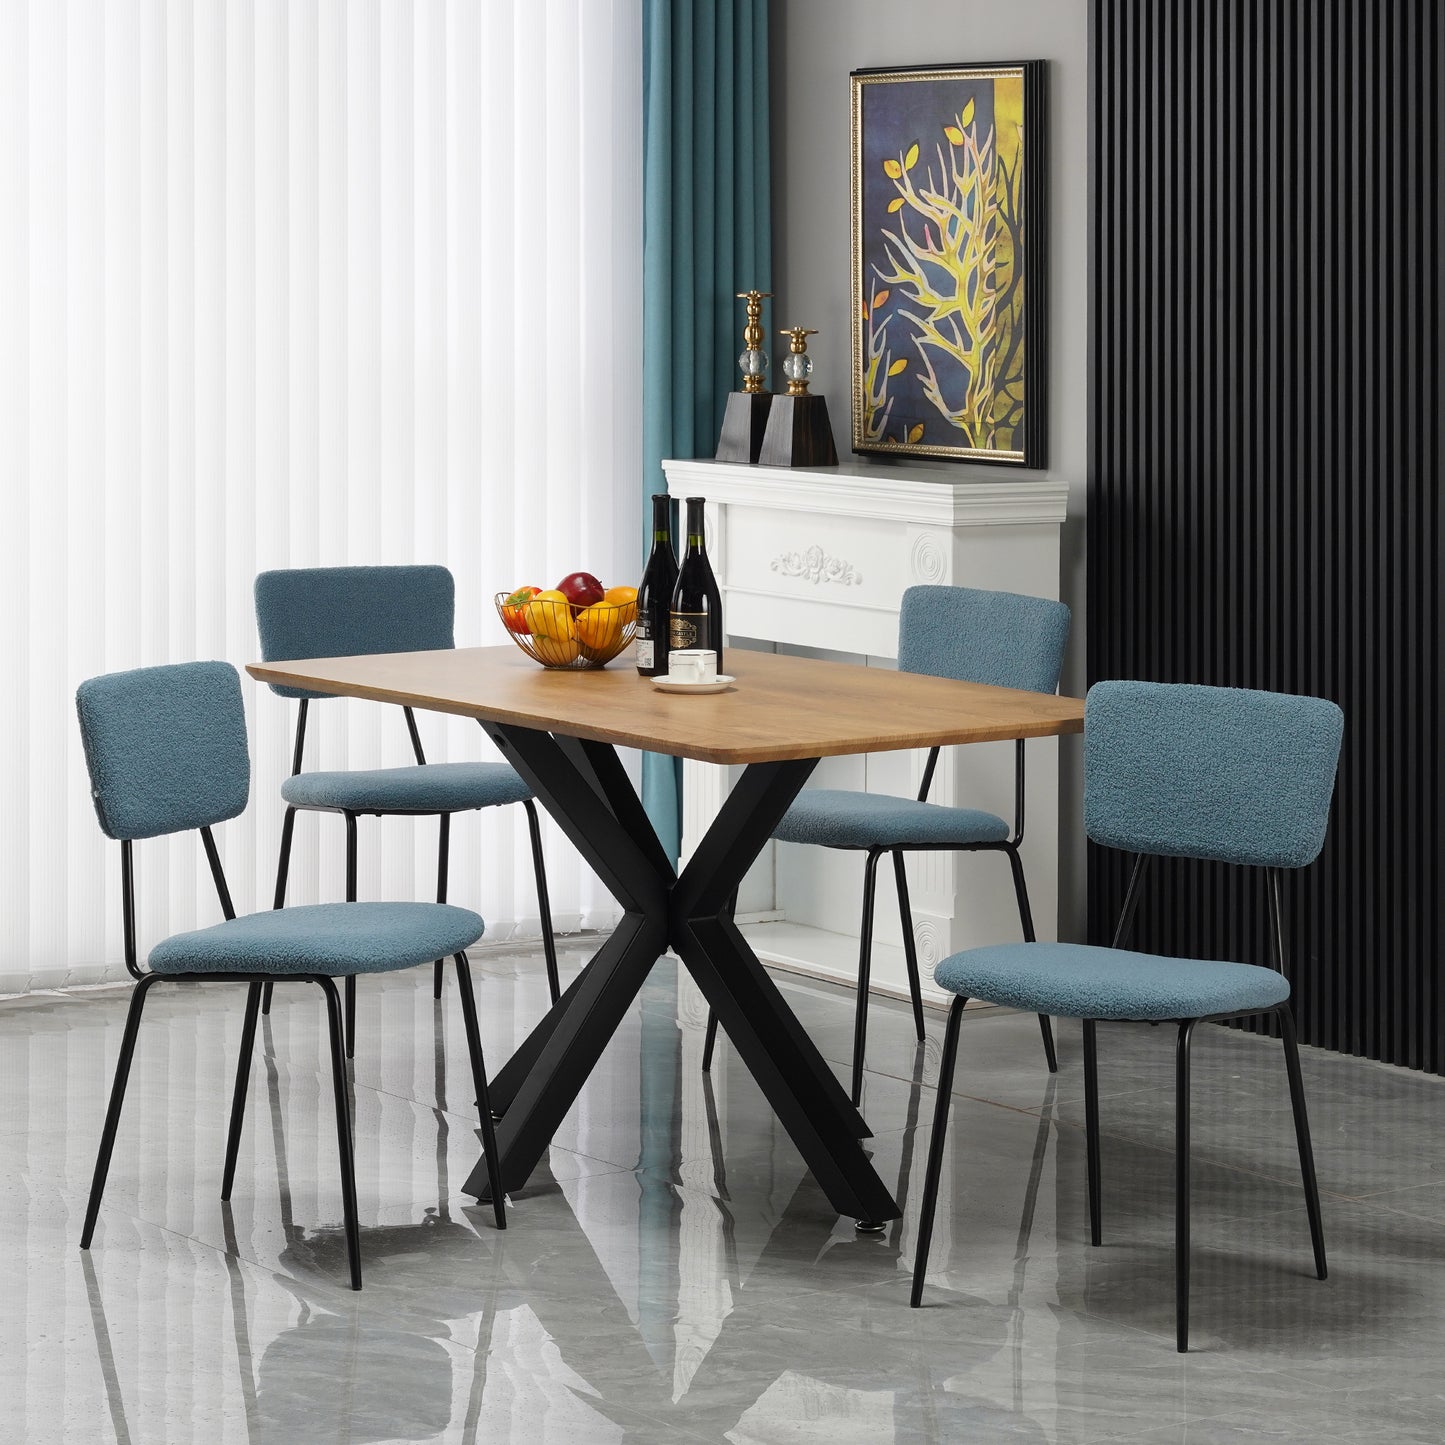 Dining Room Chairs Set of 4, Modern Comfortable Feature Chairs with Faux Plush Upholstered Back and Chrome Legs, Kitchen Side Chairs for Indoor Use: Home, Apartment (4 Blue Chairs)